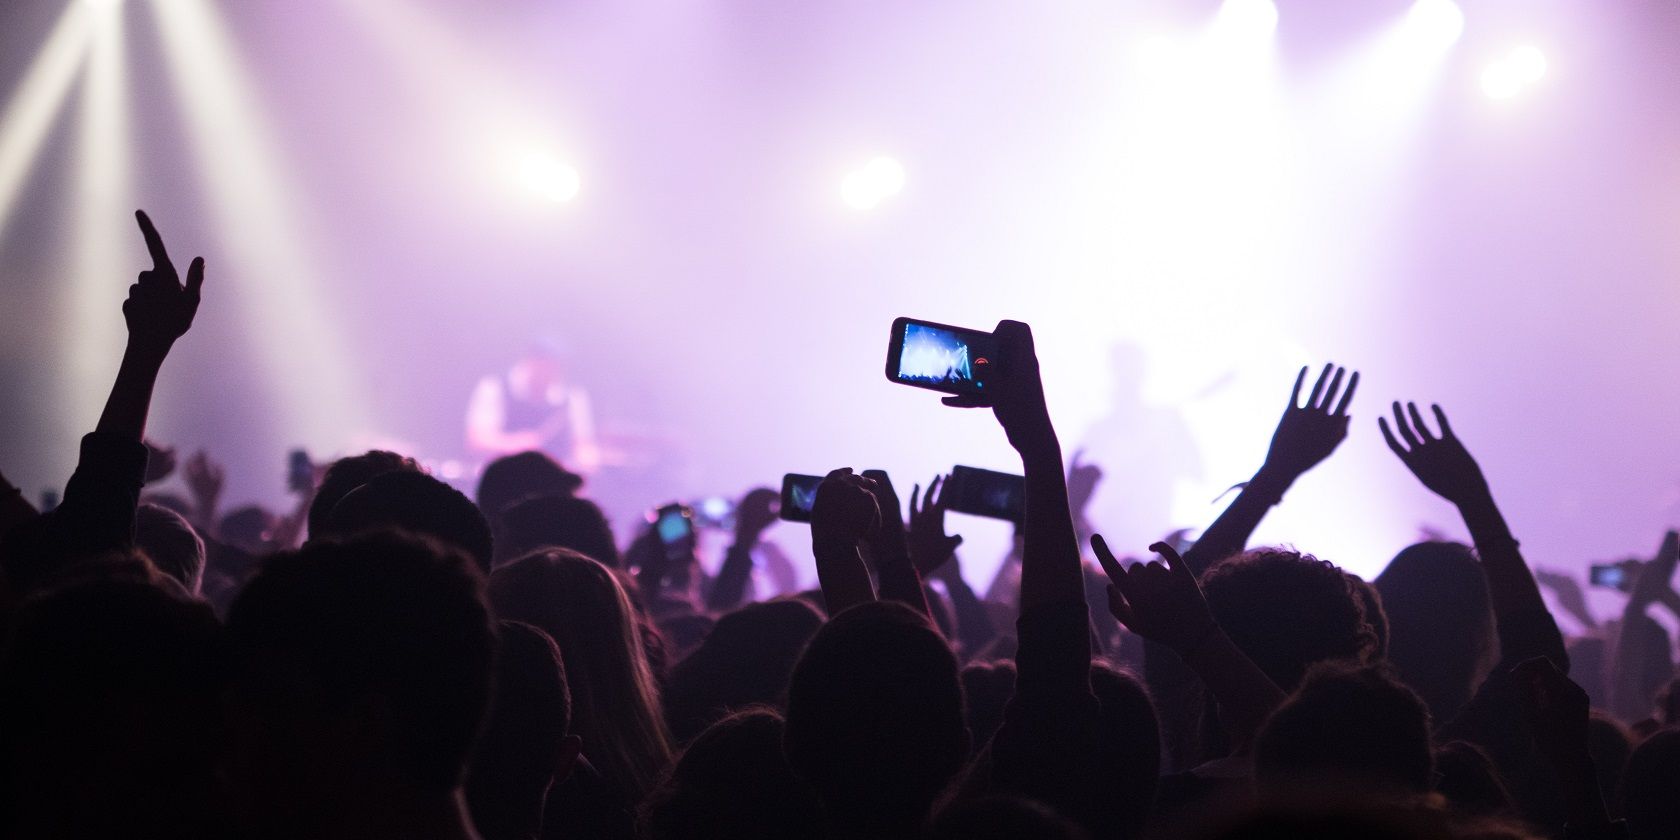 People at Concert Taking Photos With Their Smartphones